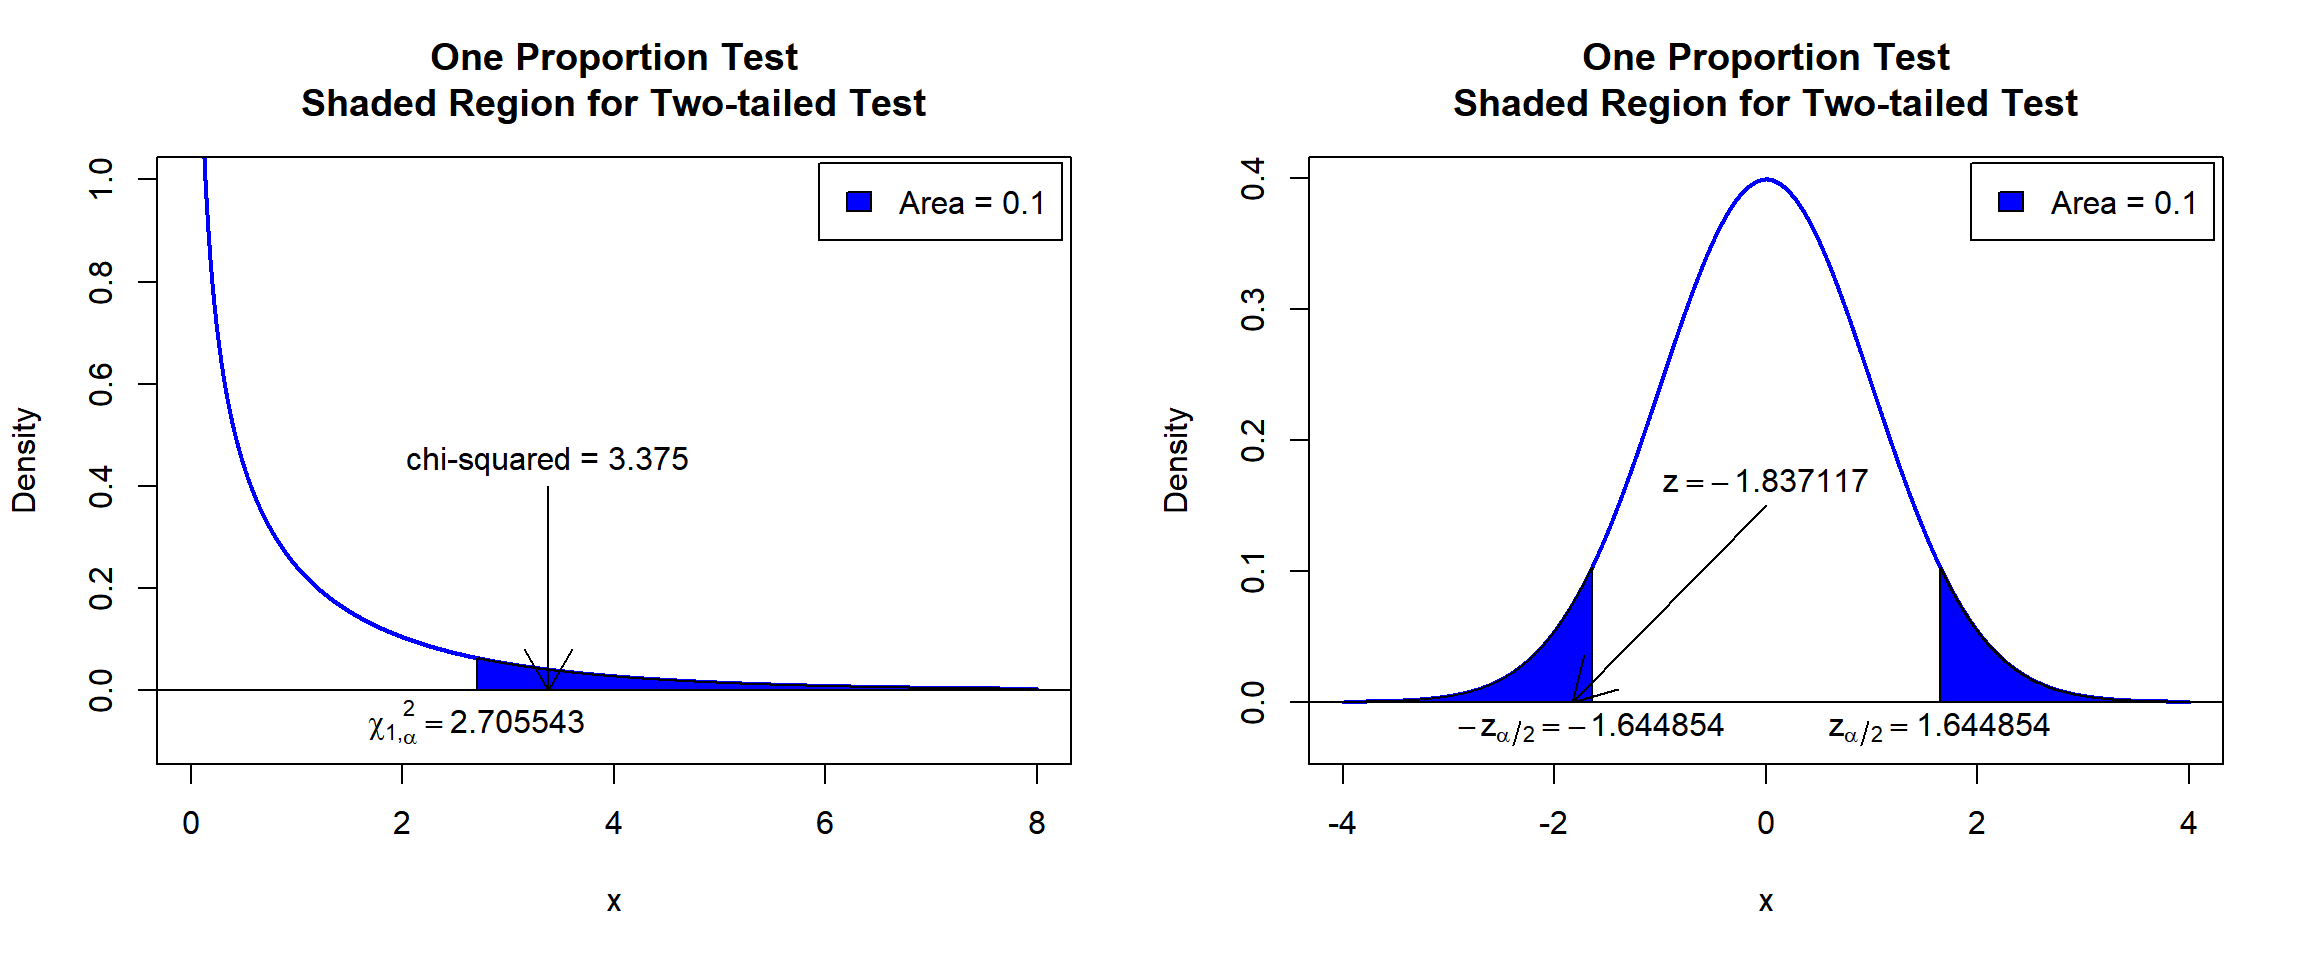 One Proportion Test Shaded Region for Two-tailed Test in R